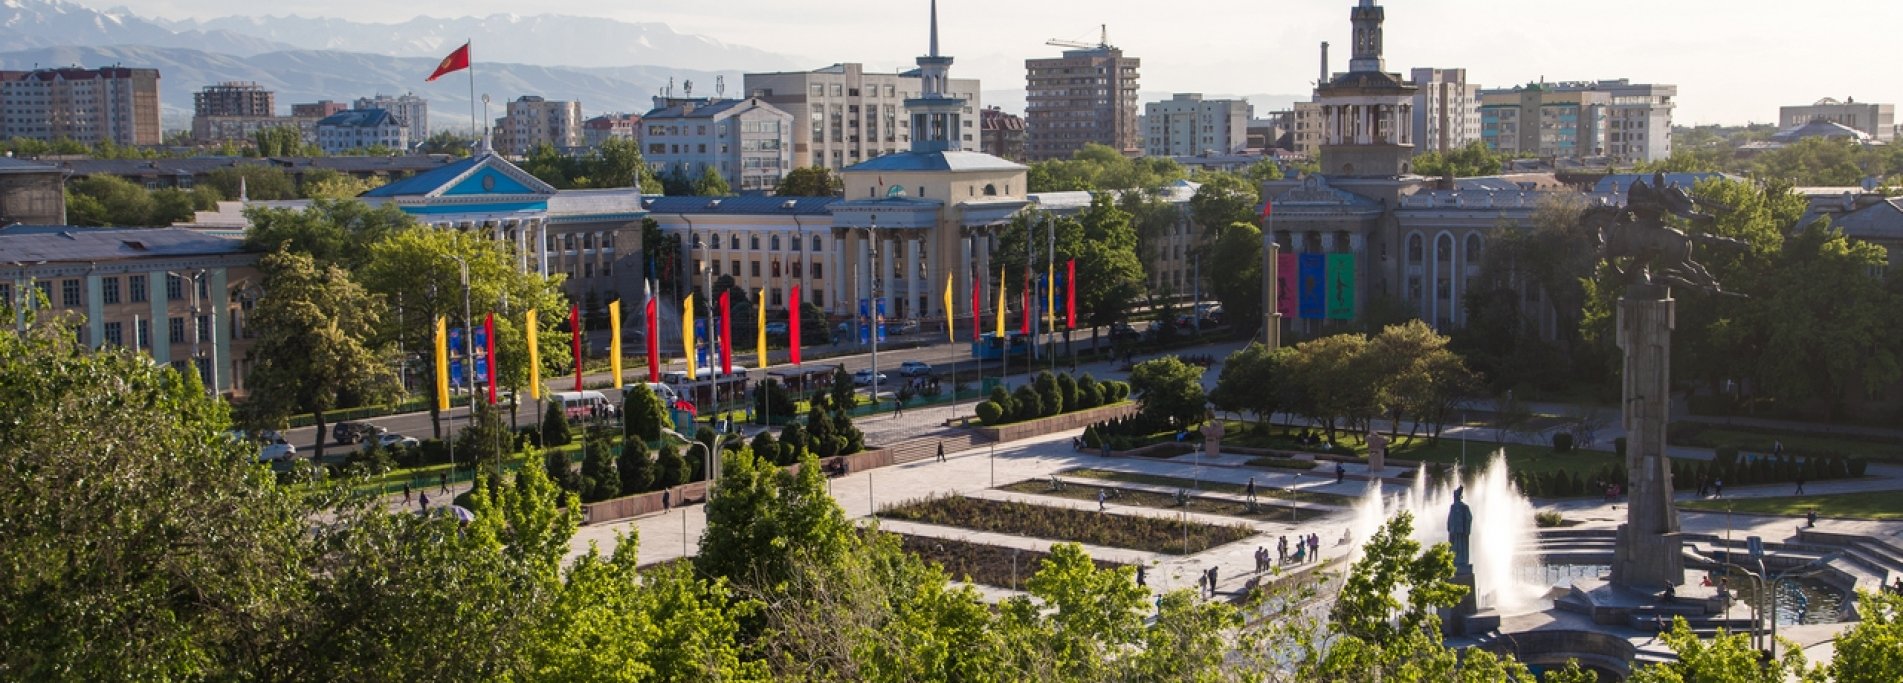 Three days in Bishkek  - Explore the city and nearest gorges